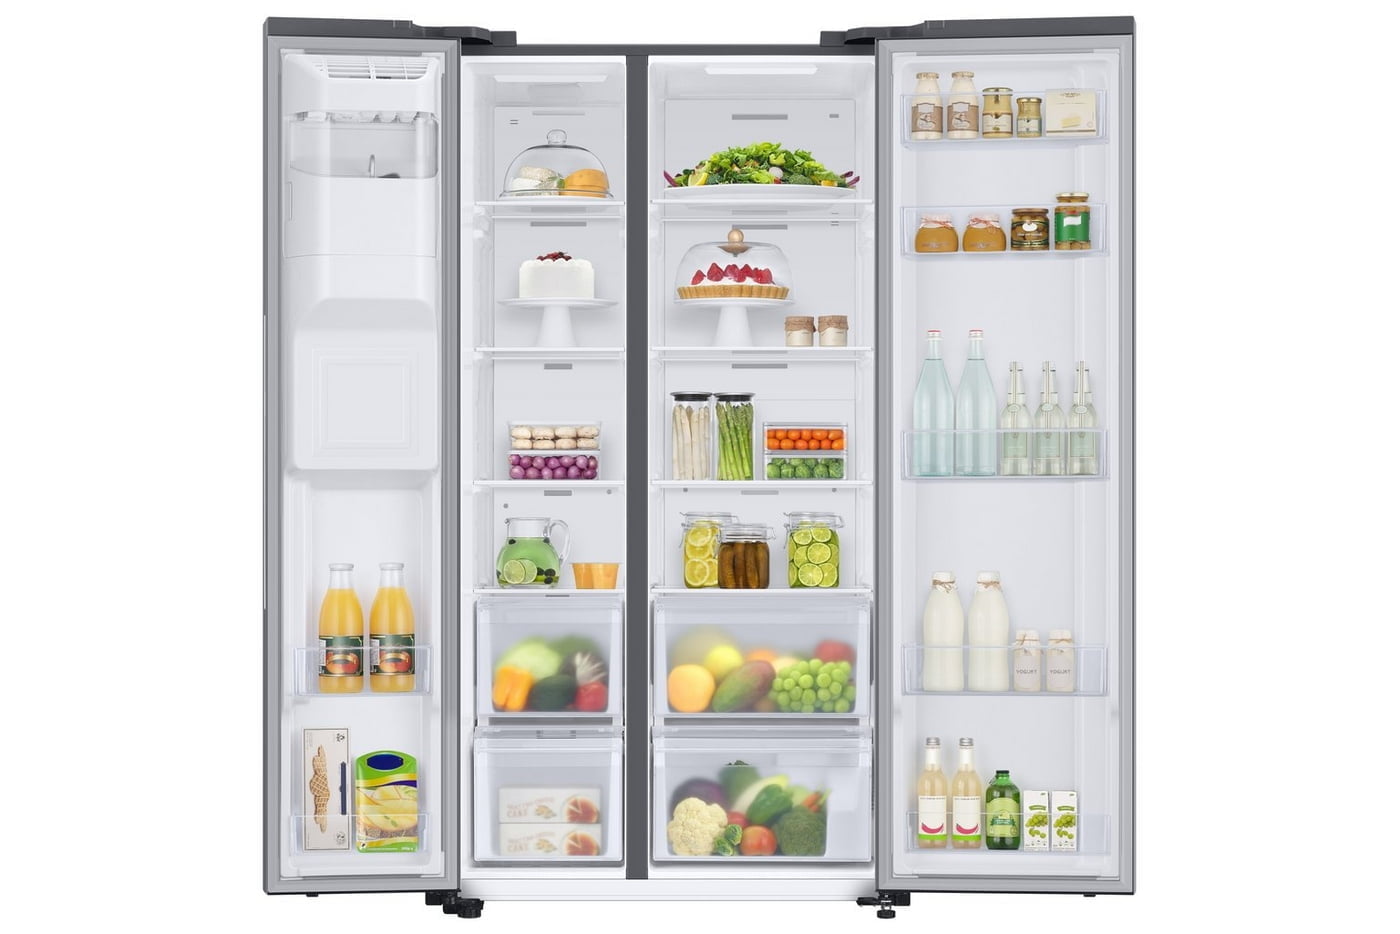 Samsung RS67A8811S9 91.2cm American Style Fridge Freezer with SpaceMax Technology - Stainless Steel